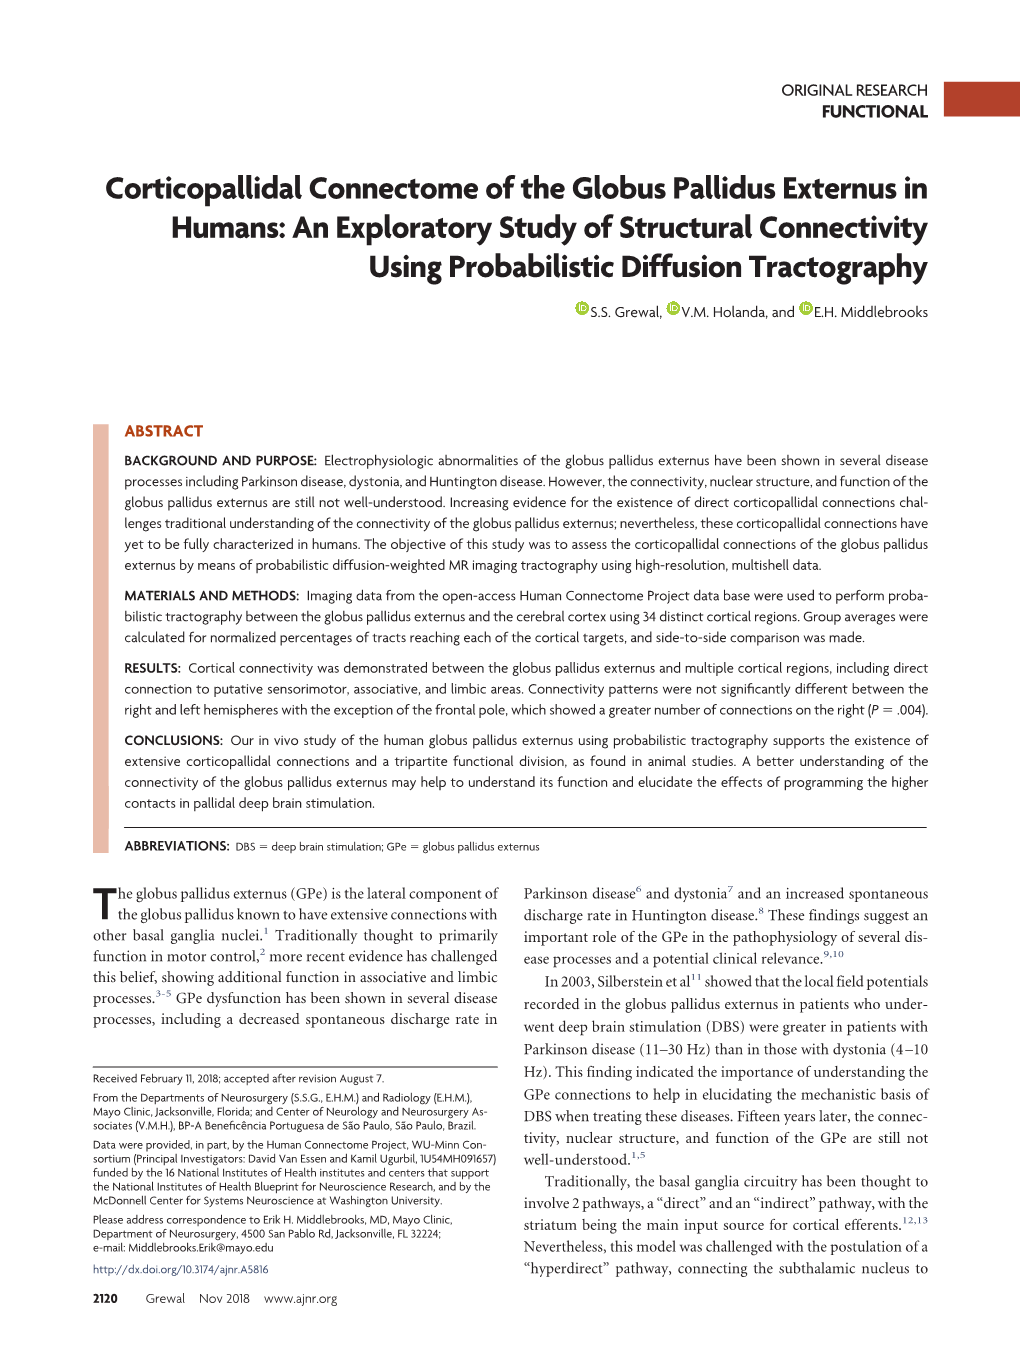 Corticopallidal Connectome of the Globus Pallidus Externus in Humans: an Exploratory Study of Structural Connectivity Using Probabilistic Diffusion Tractography